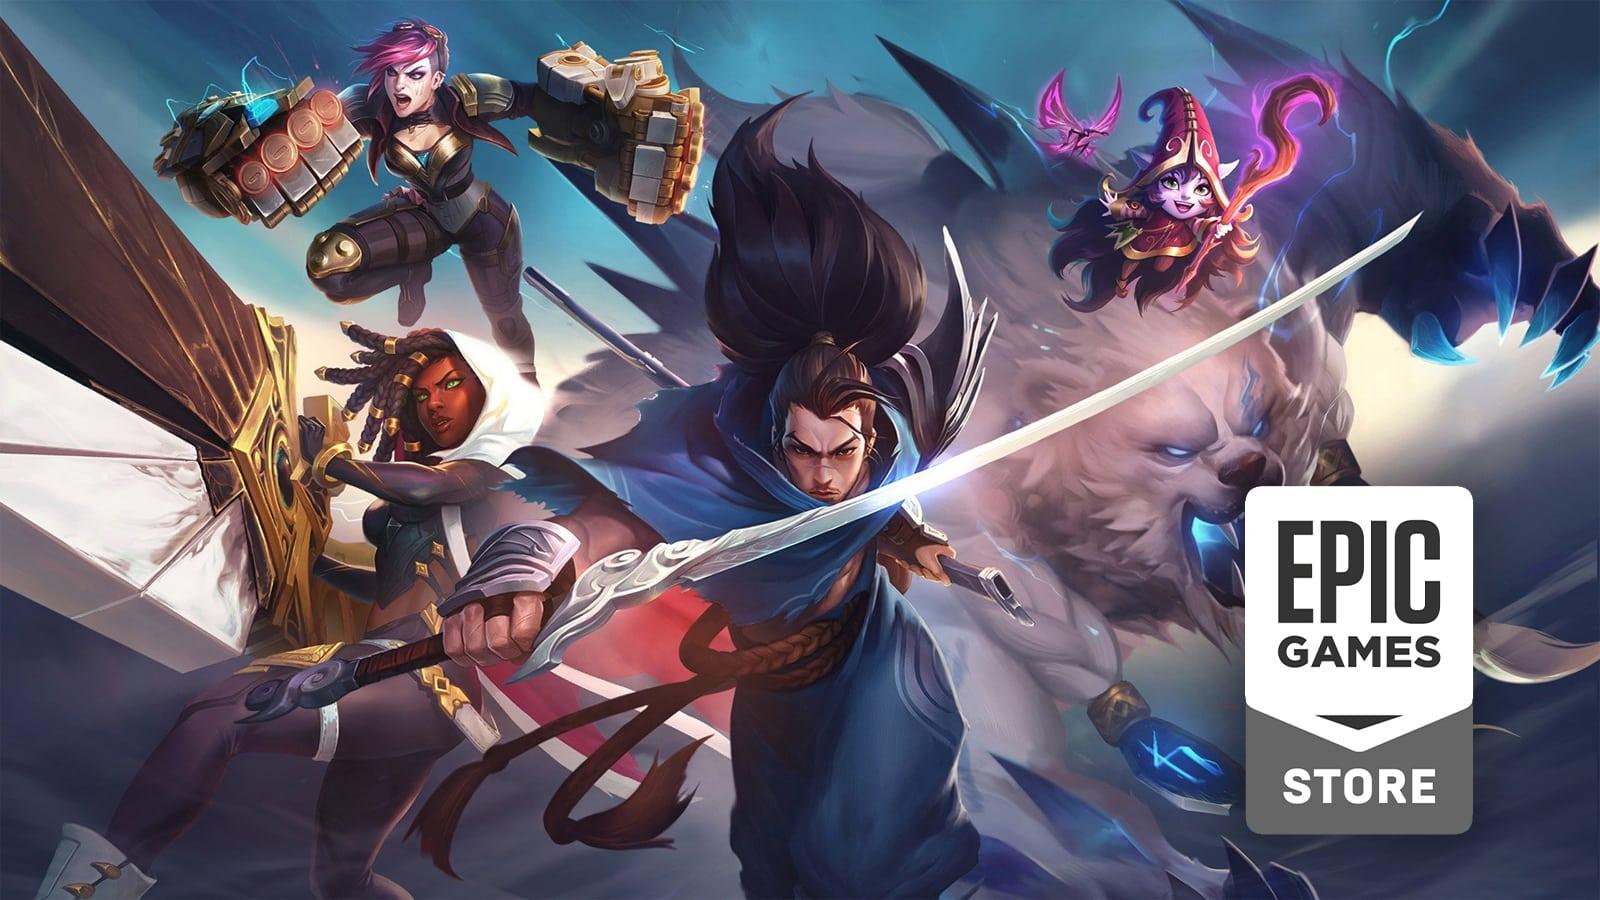 League of Legends key art with Epic Games Store logo